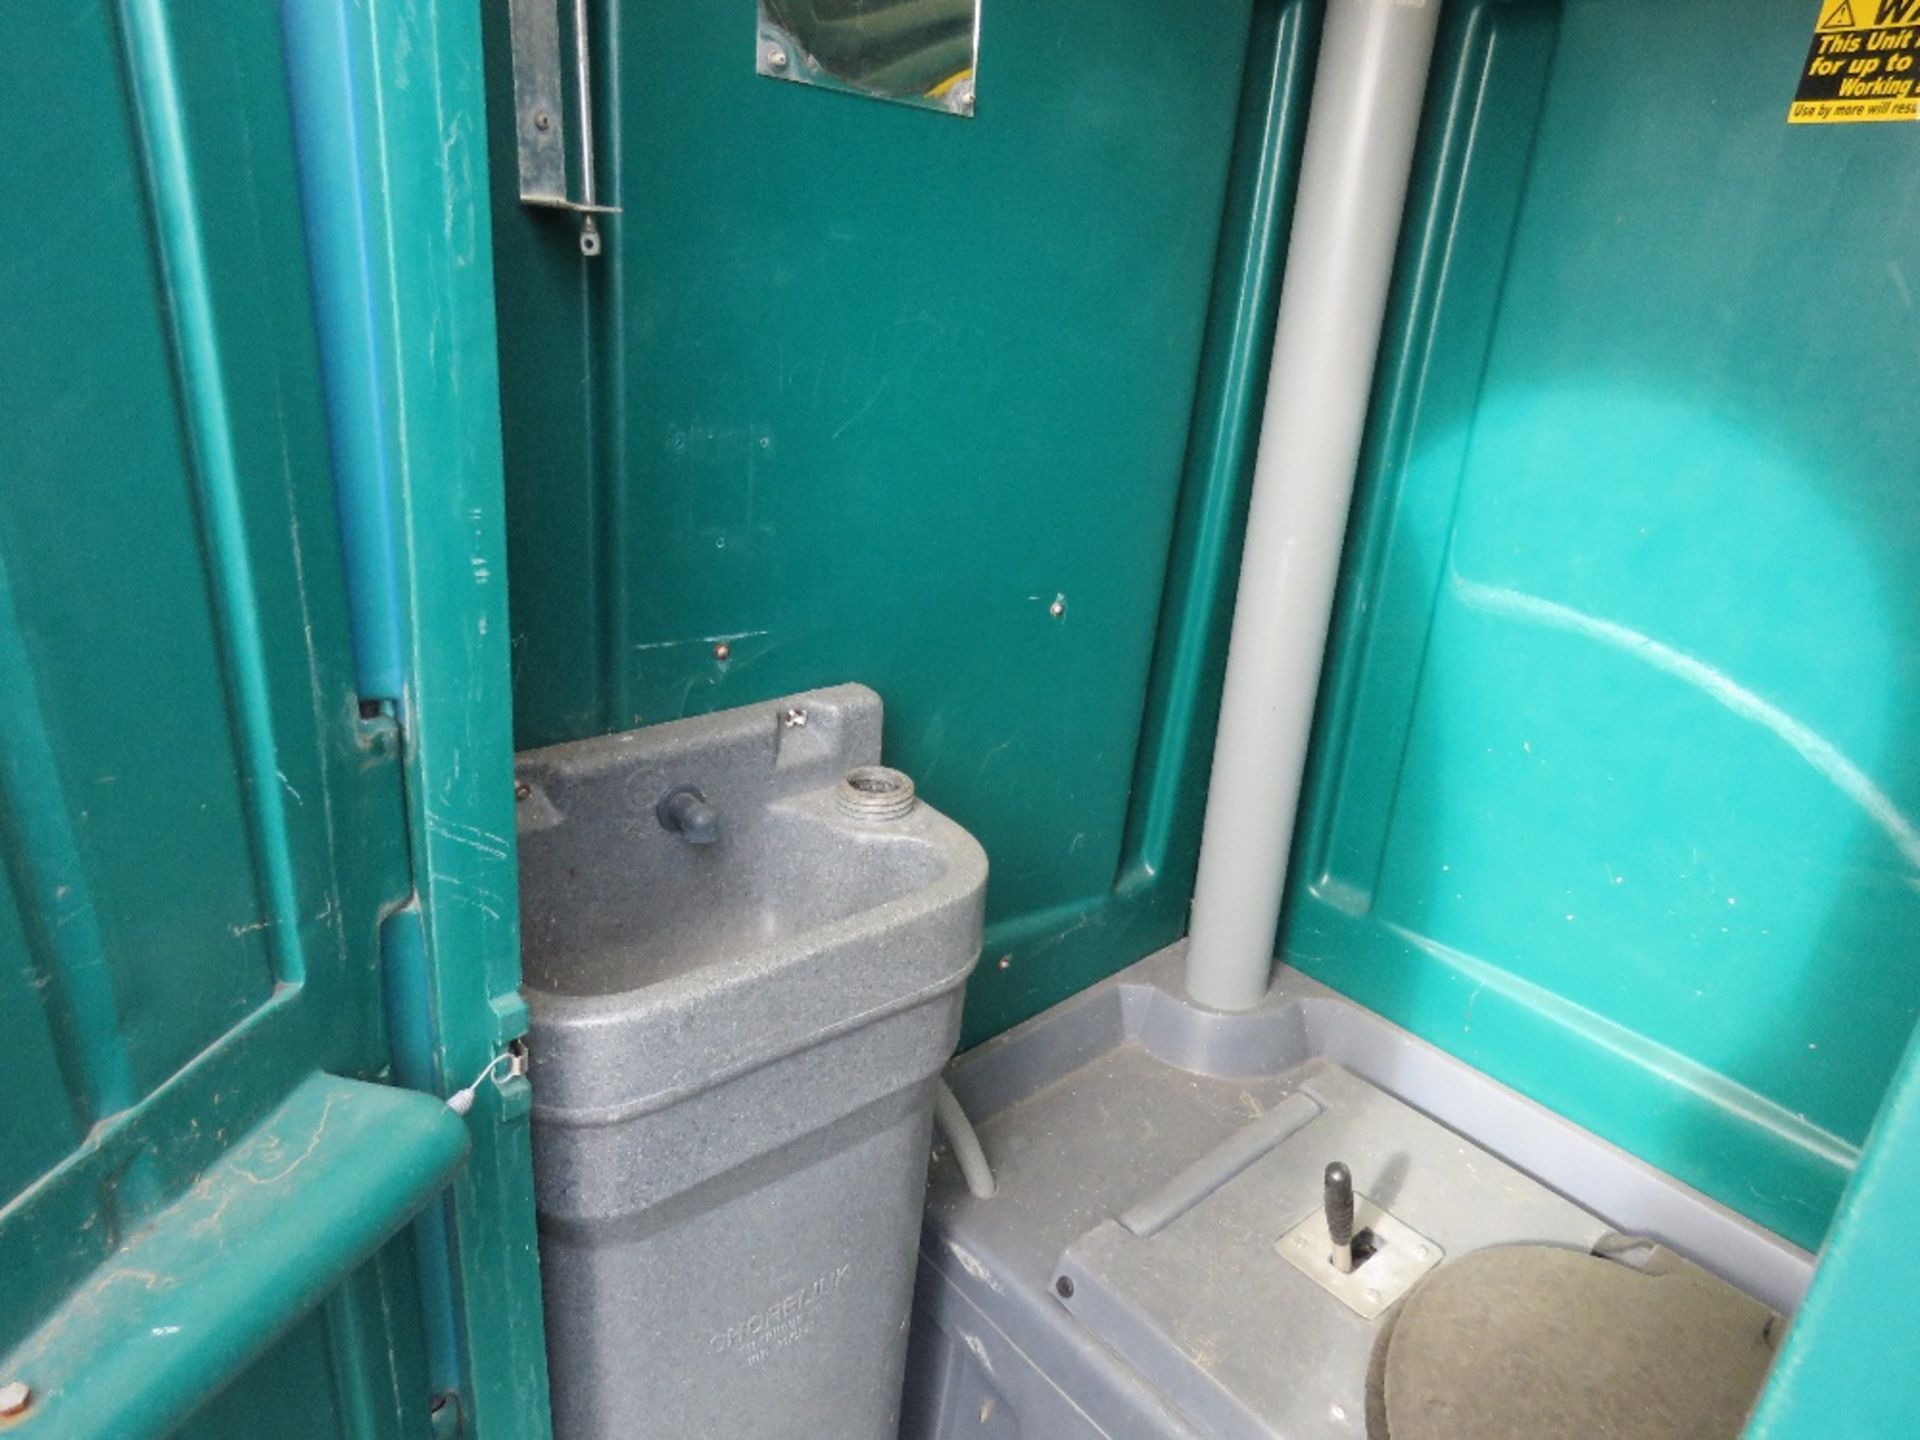 Portable site toilet - Image 3 of 4